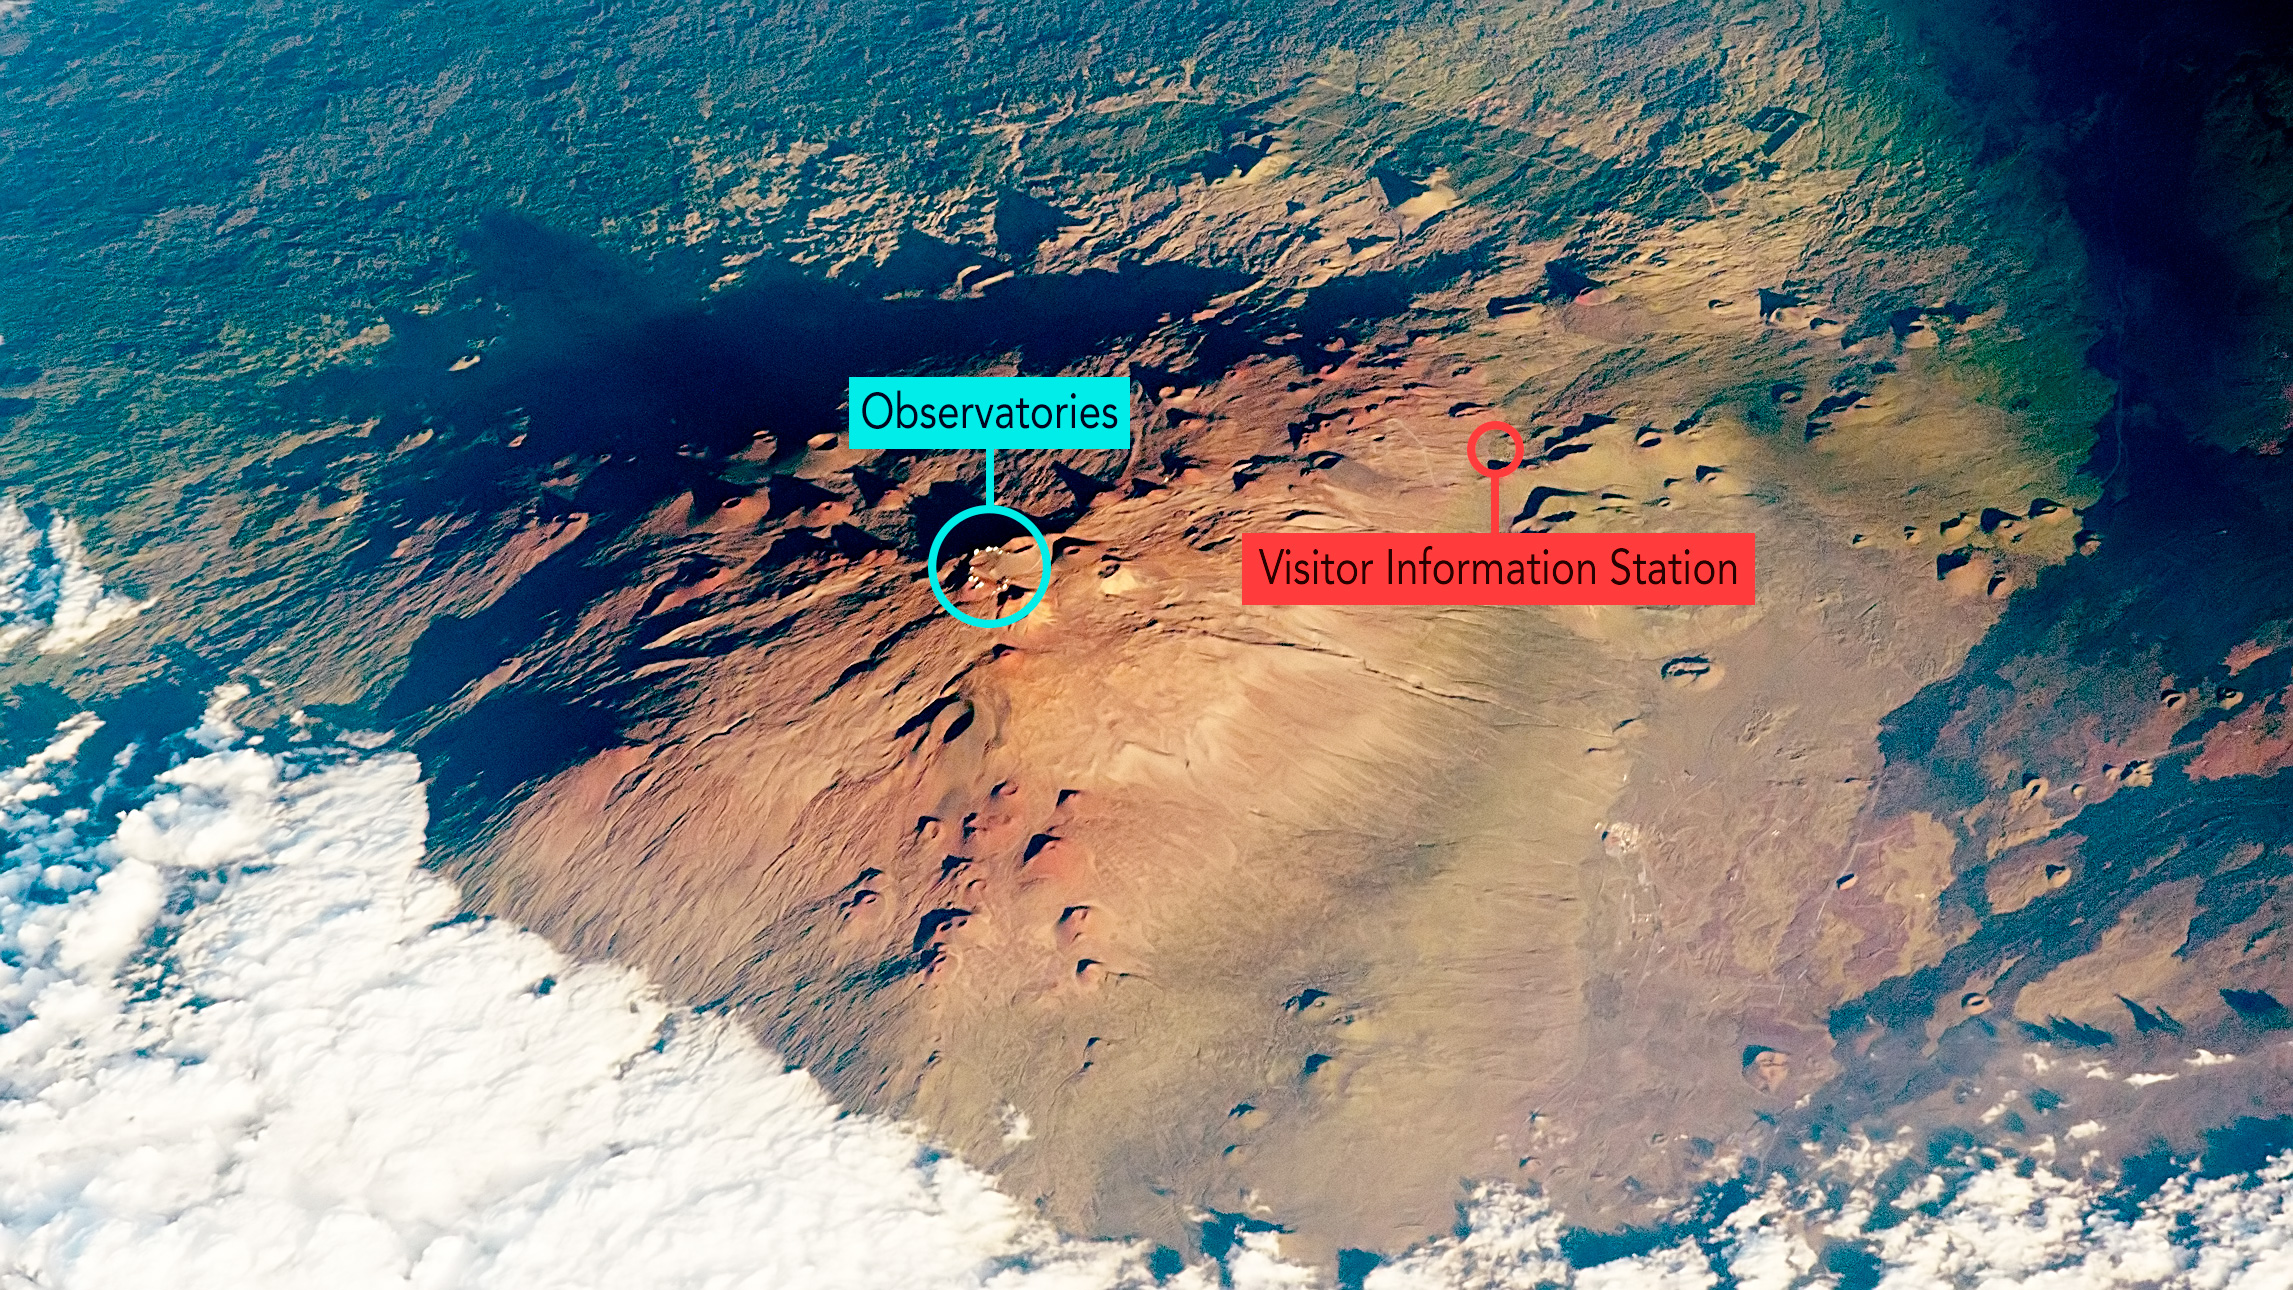 Hawaii's Mauna Kea seen here from the International Space Station. Its summit, at 13,800 feet (4.2 kilometers) hosts several world-class observatories, including the Keck and Subaru telescopes.